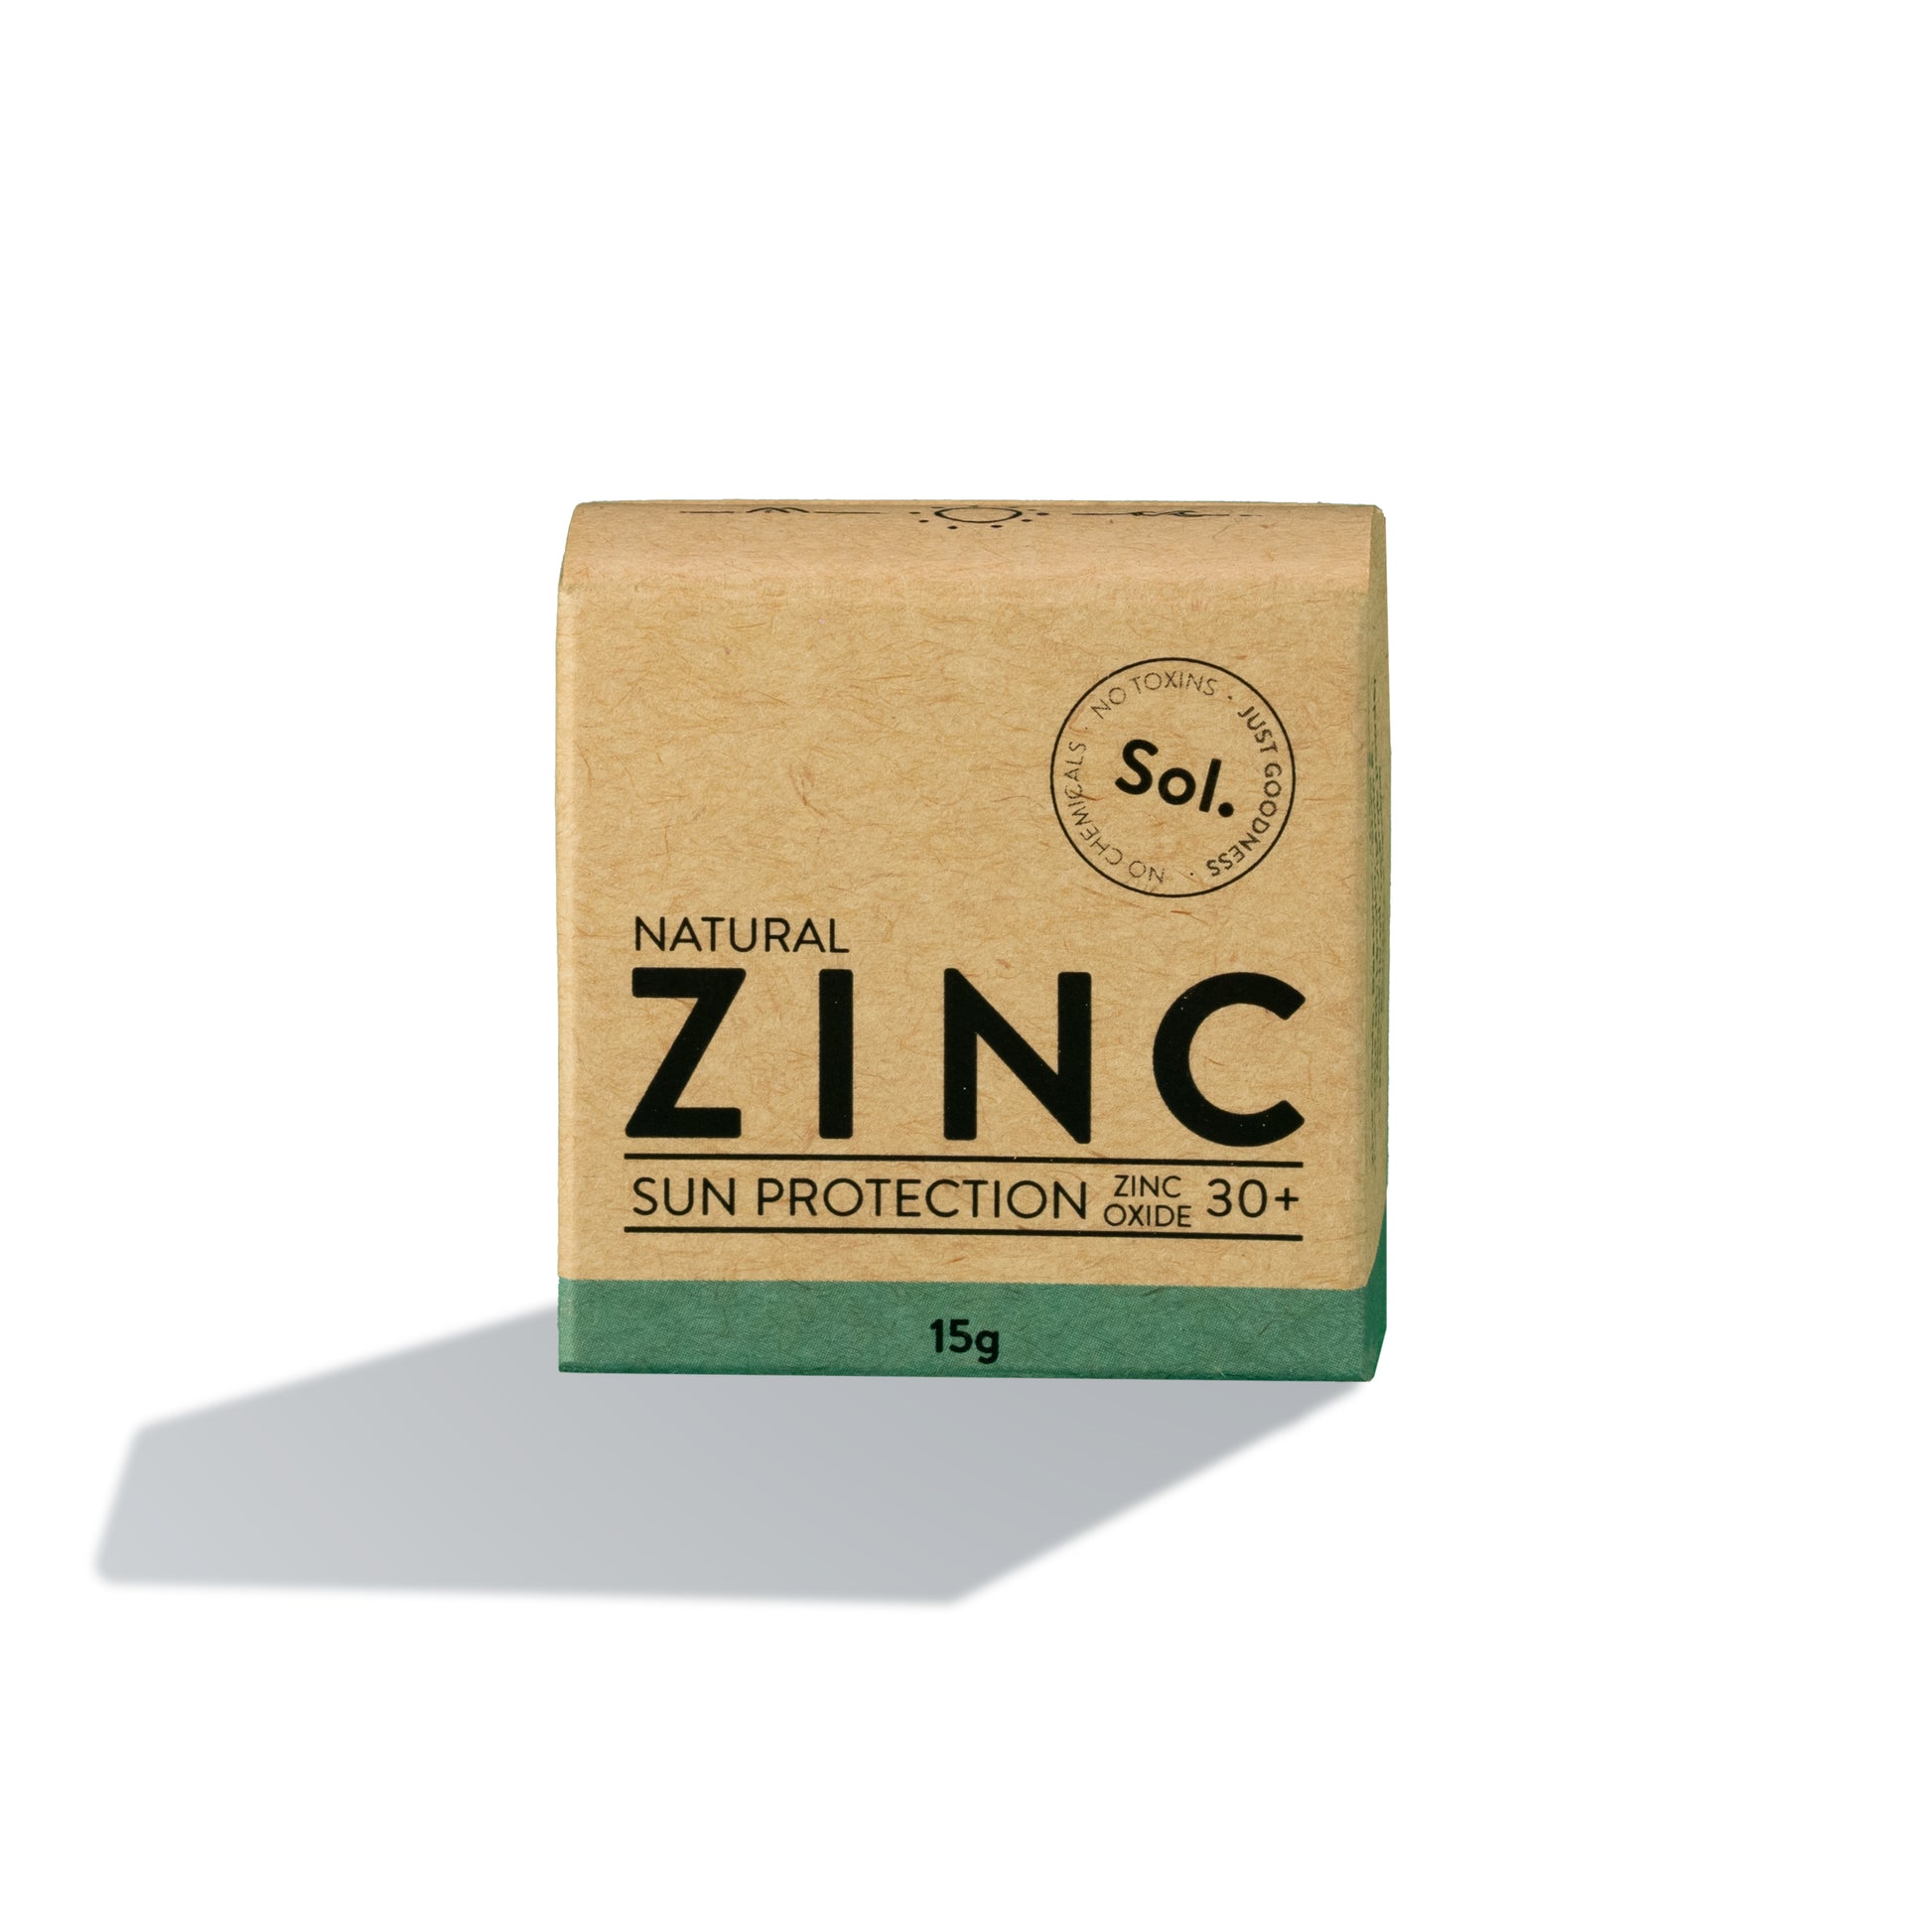 Sol Face Zinc 30+ is a safe and effective way to nourish and protect your skin from the harsh elements of the sun - ethically, and sustainably.